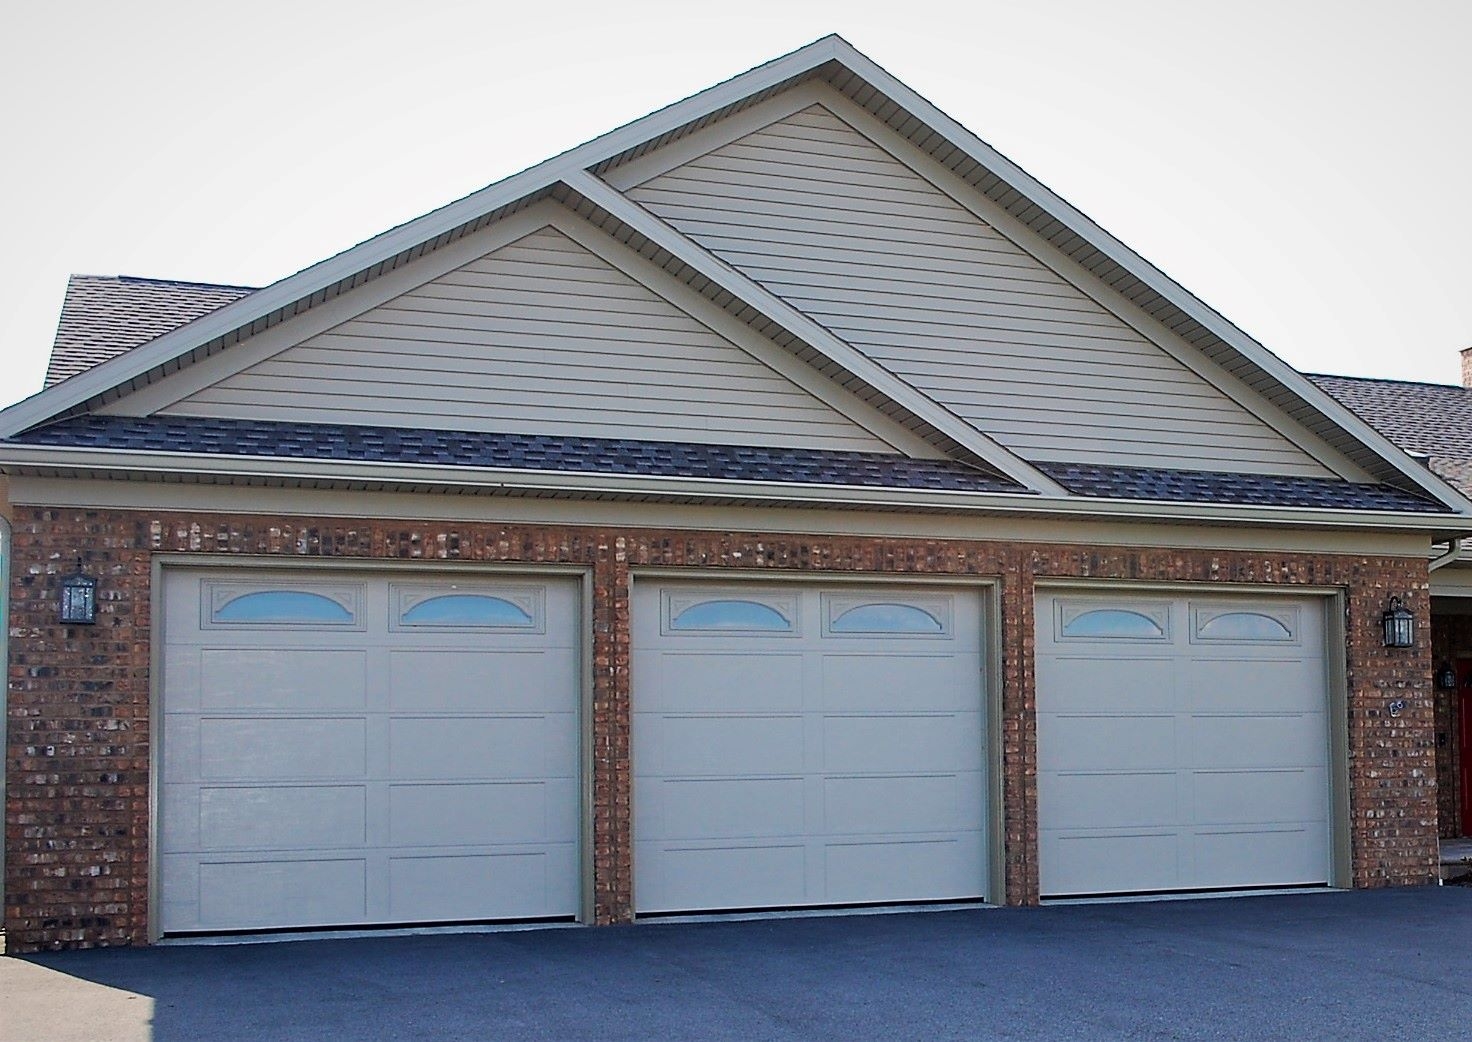 Garage in Hagerstown MD built by Mt. Tabor Builders of Clear Spring, MD